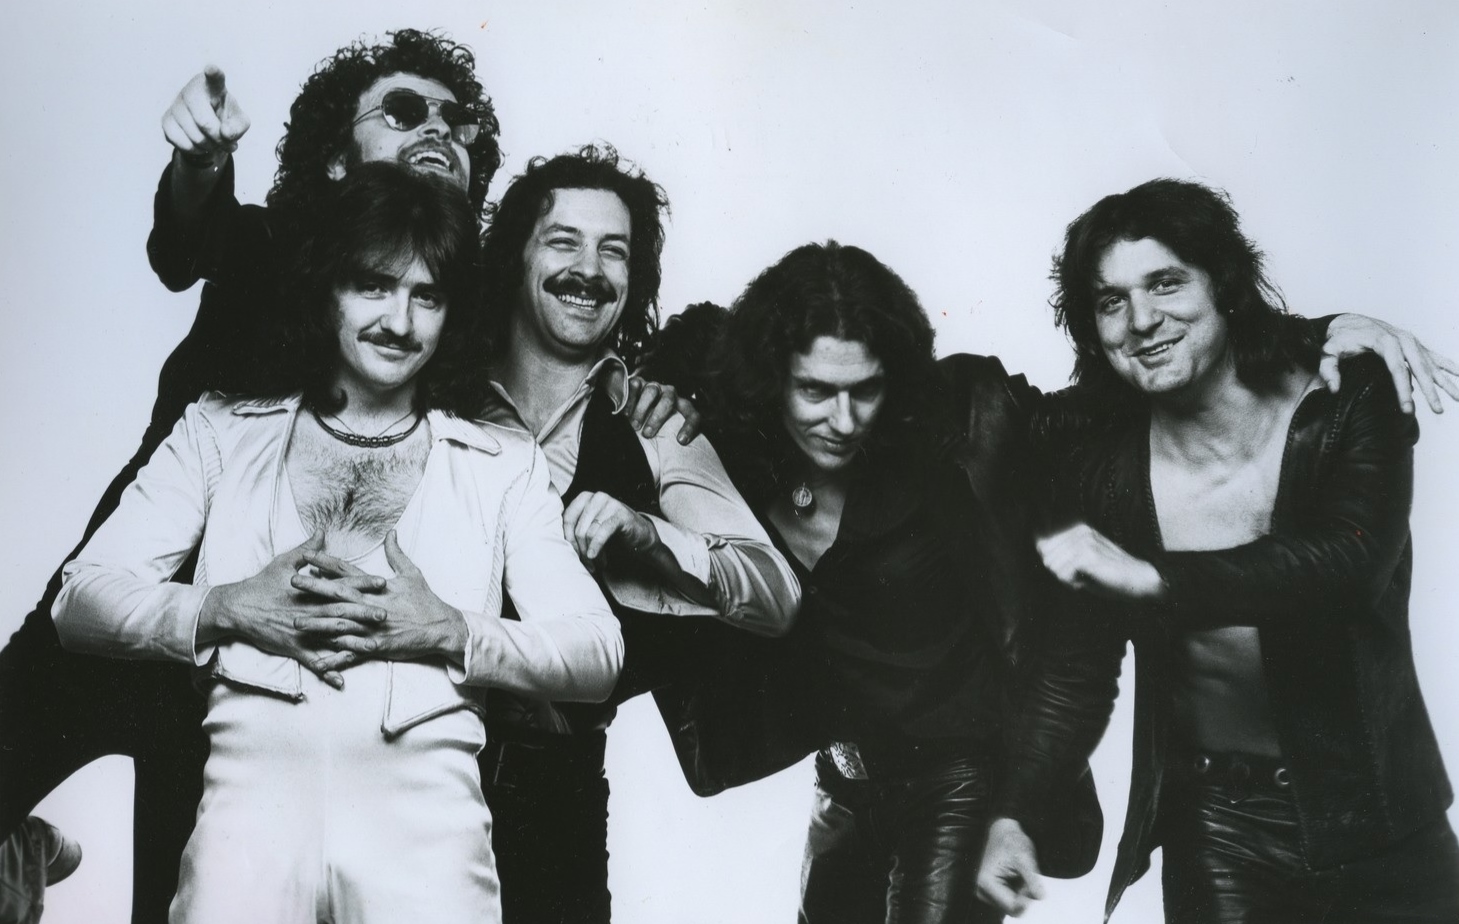 Blue_Oyster_Cult_1977_publicity_photo